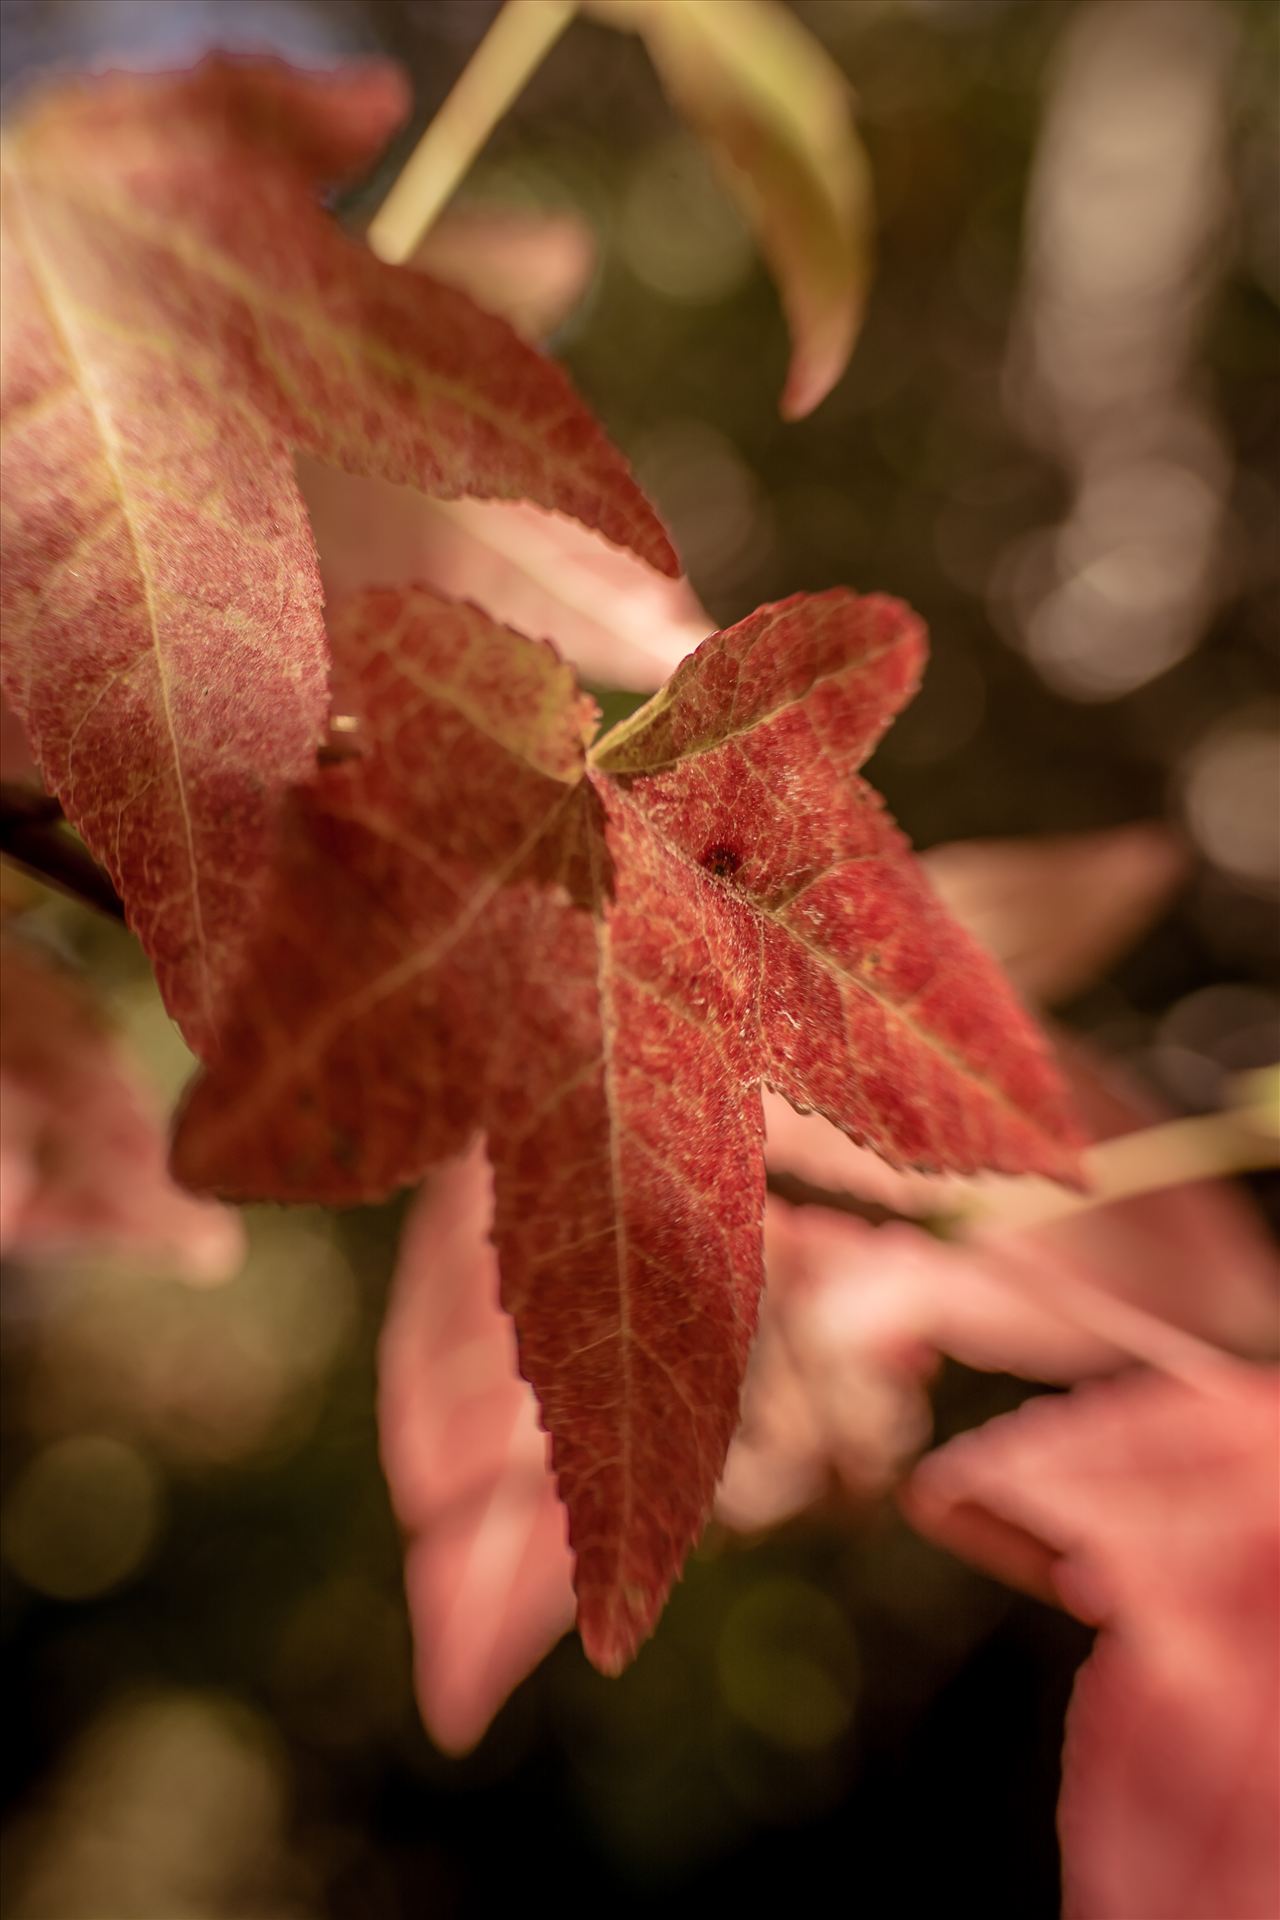 Maybe Maple 092615.jpg - Maple leaf with fall colors during the changing of the seasons on California's Central Coast. by Sarah Williams